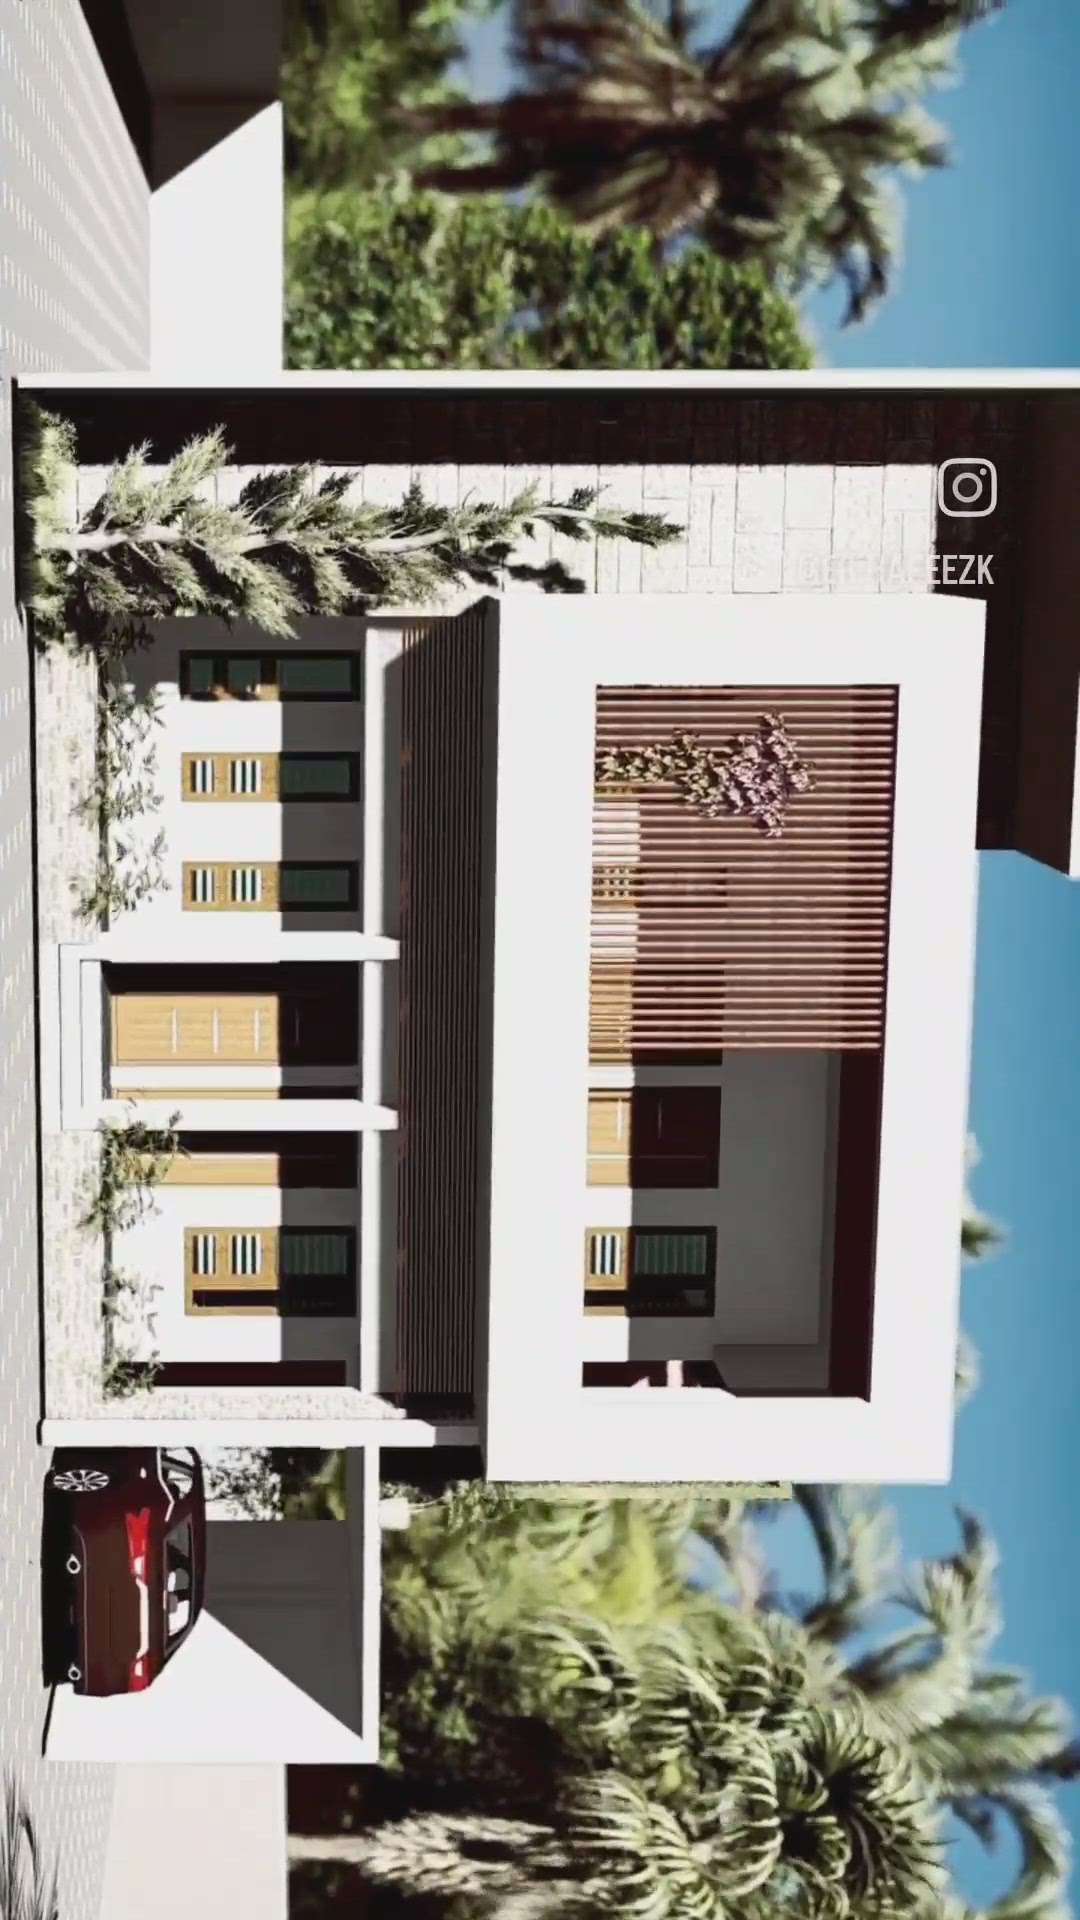 1500sqft 4BHK HOUSE located in Idukki 

#architecturedesigns #modernhome #architecture #design #interiordesign #art #architecturephotography #photography #travel #interior #architecturelovers #architect #home #homedecor #archilovers #building #photooftheday #arquitectura #instagood #construction #ig #travelphotography #city